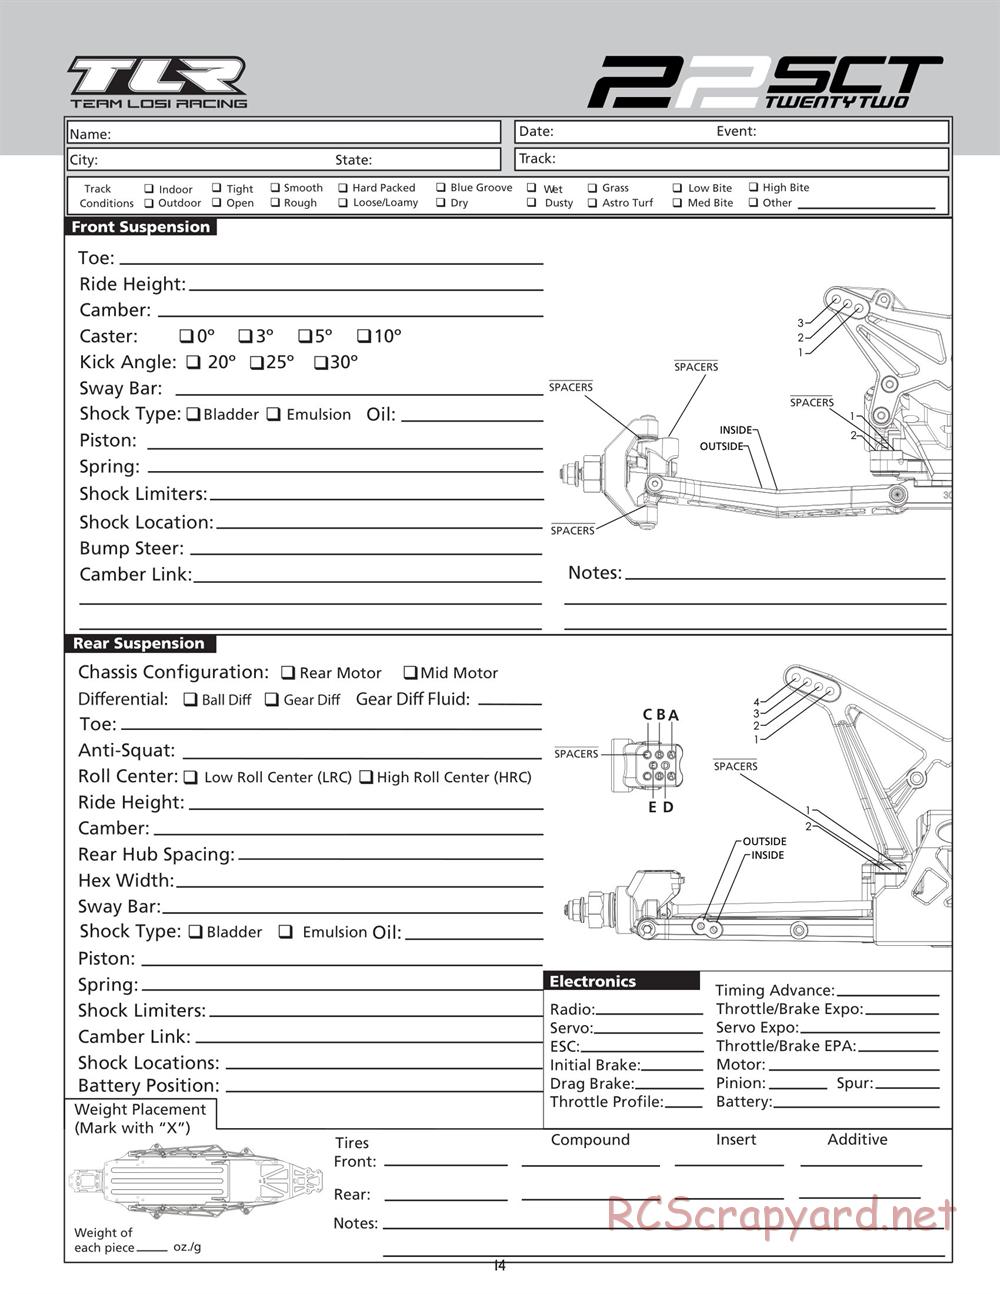 Team Losi - 22SCT - Manual - Page 14